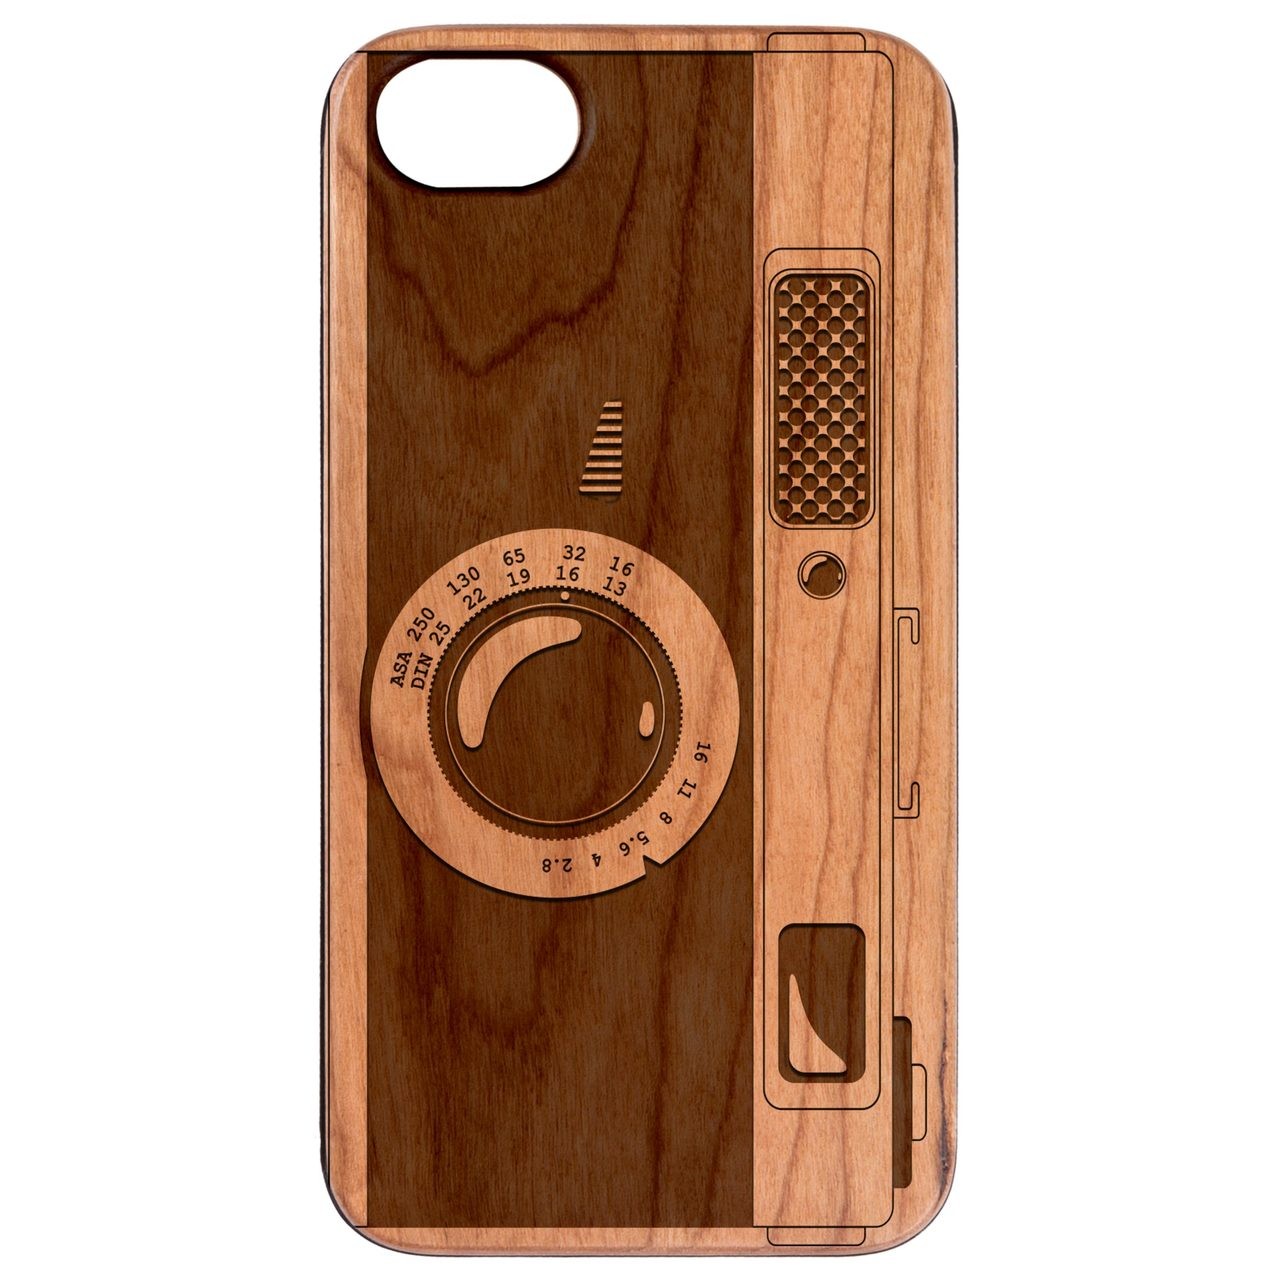  Retro Camera - Engraved - Wooden Phone Case - IPhone 13 Models